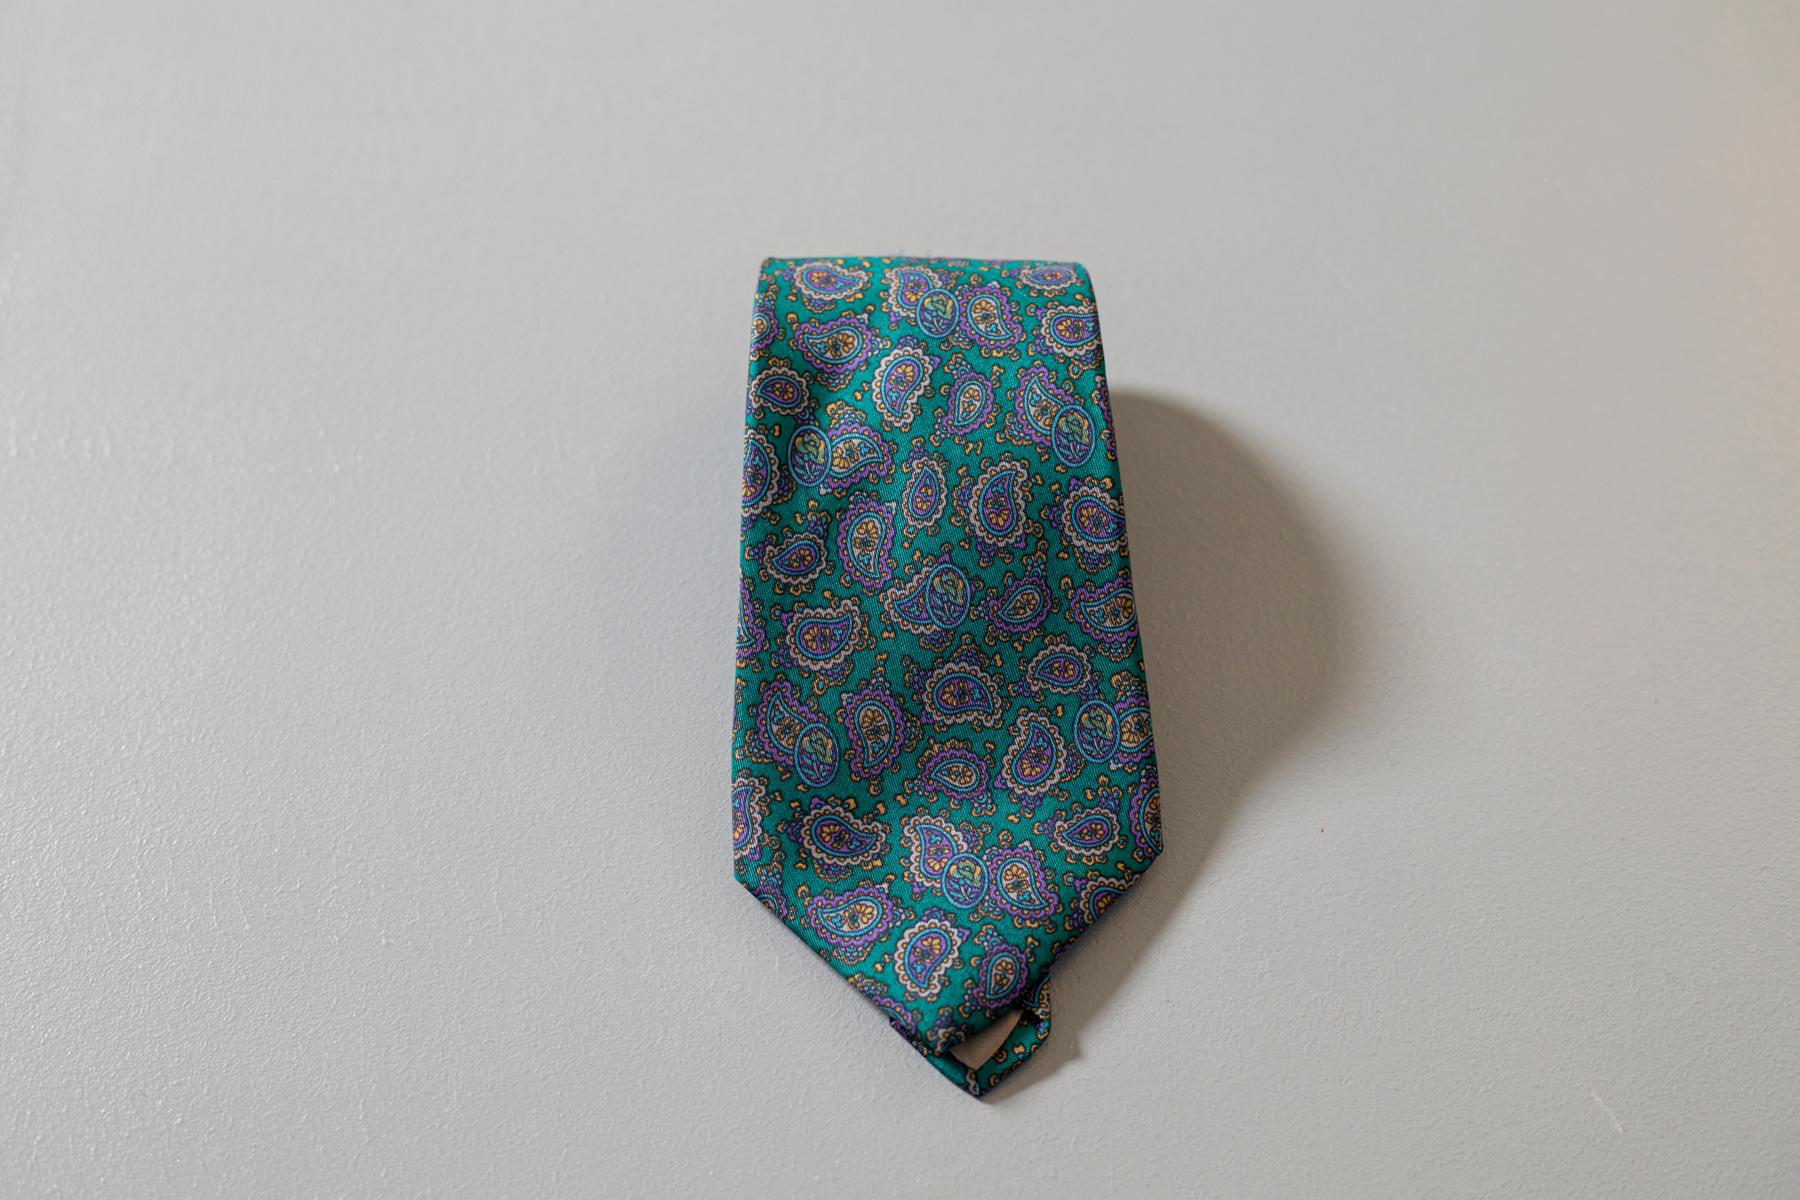 Vintage Pierre Lorrain tie, it is made in 100% silk, with paisley motifs in shades of green and purple. Thanks to its very particular pattern, if combined with an elegant suit it is ideal for a refined and particular look. It is a perfect tie for an